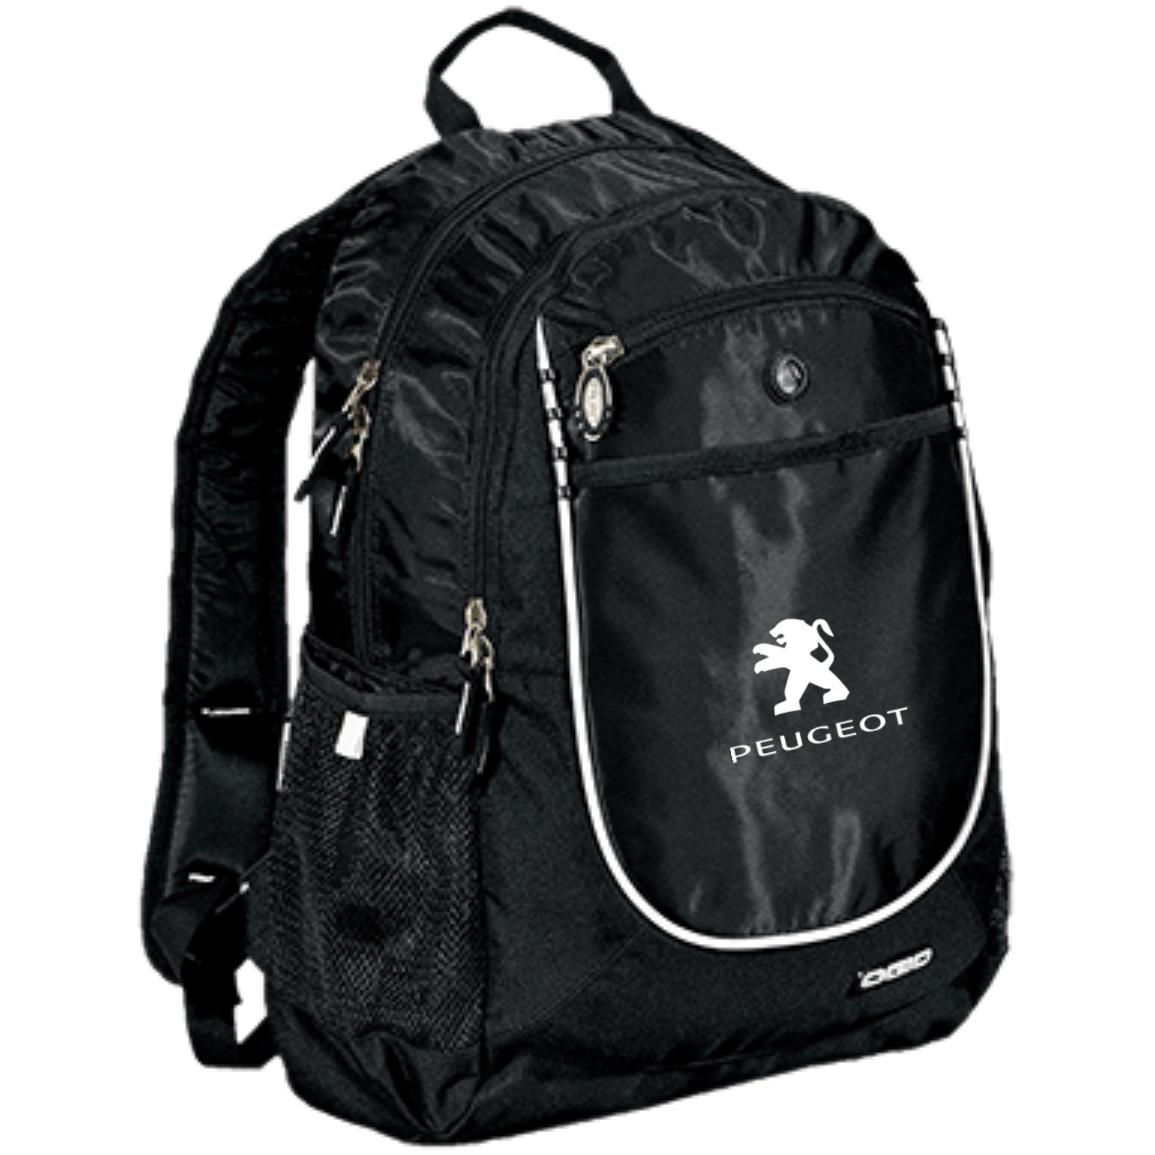 206 tours backpack